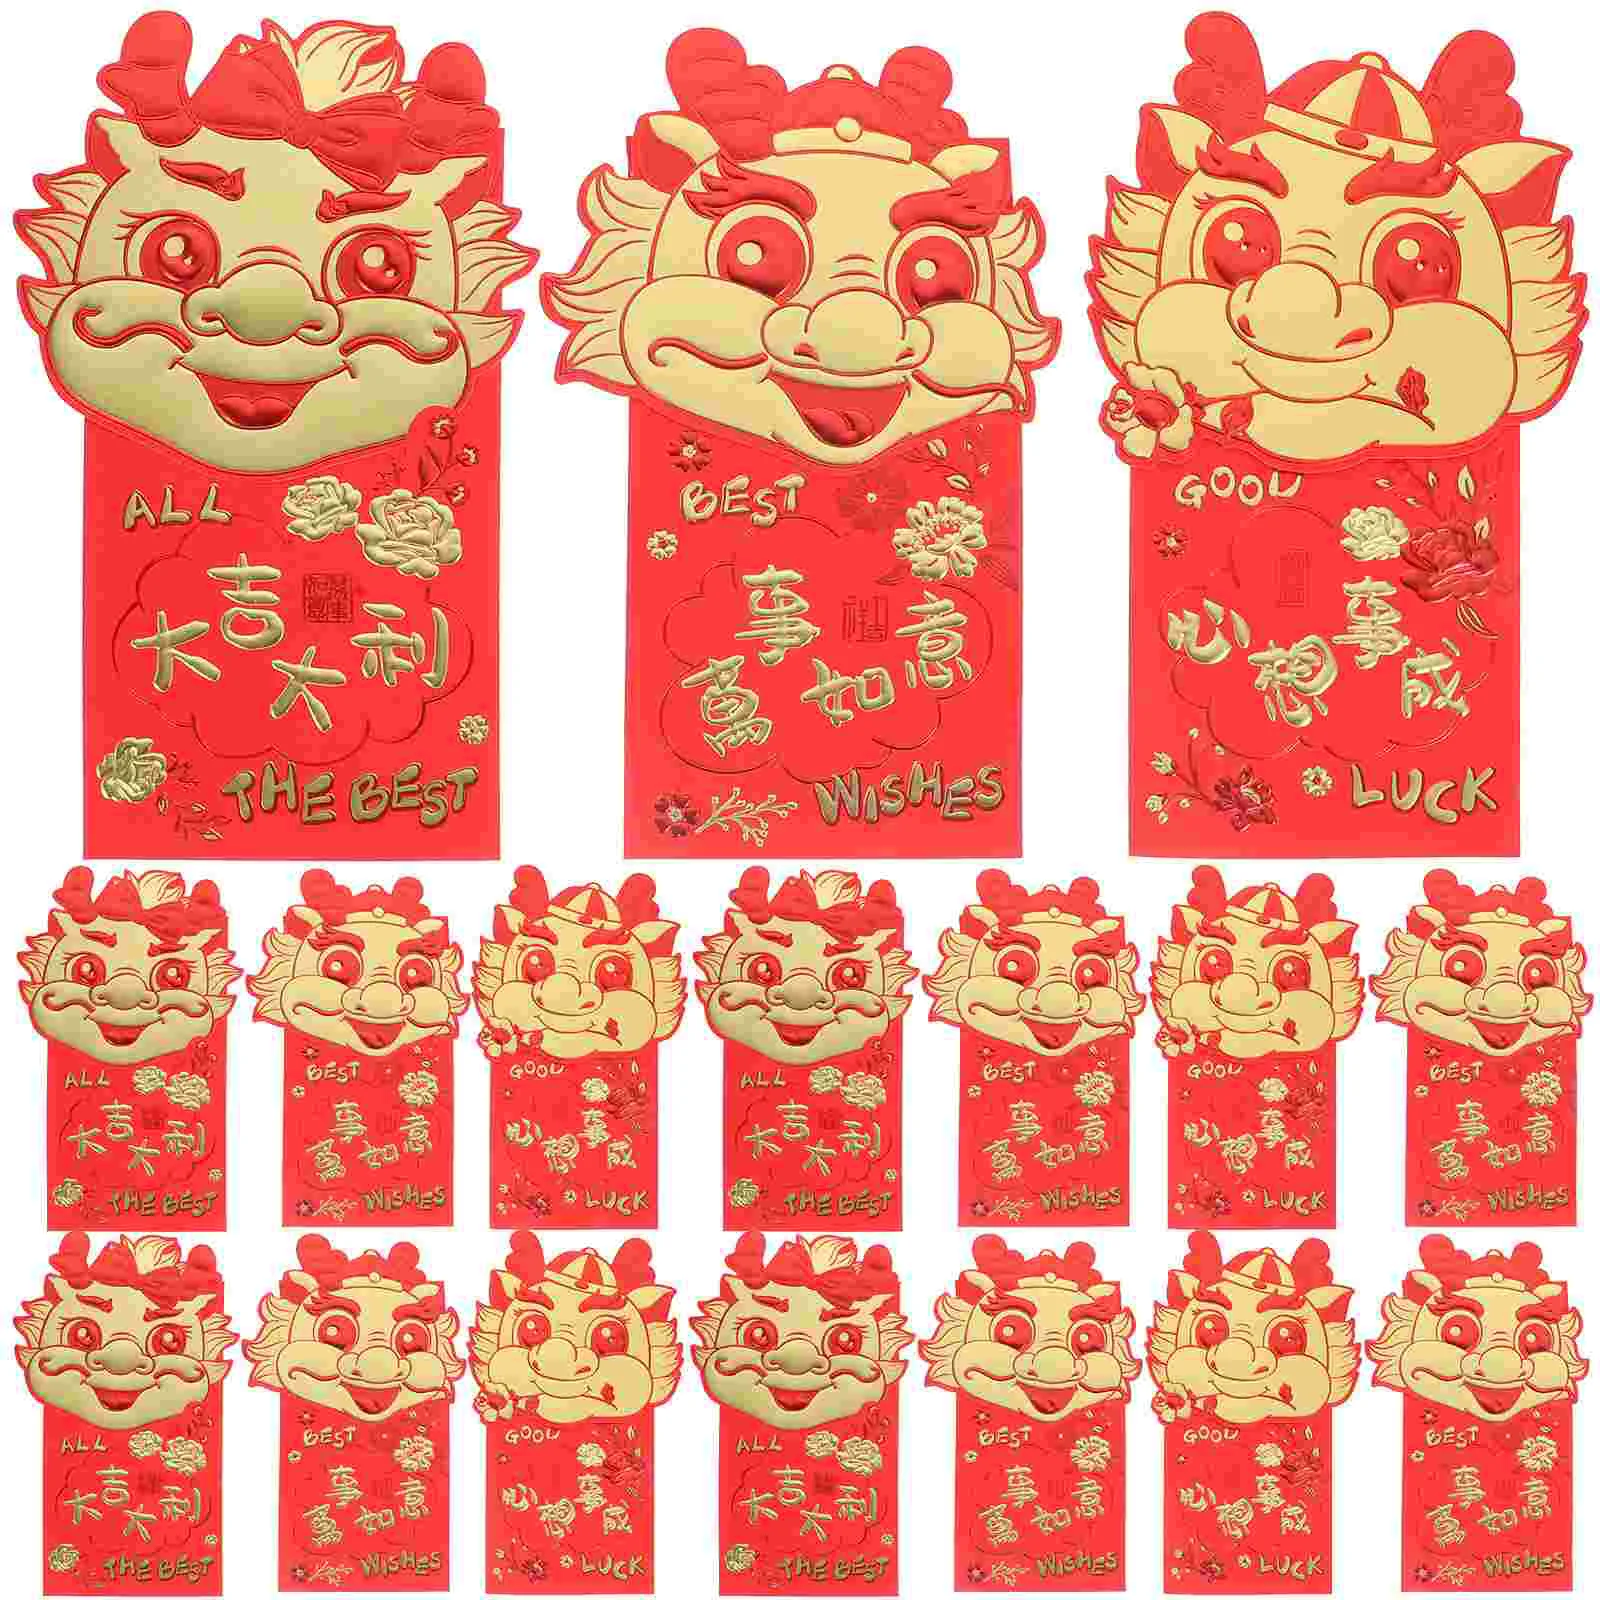 

Red Envelope Chinese New Year Money Pouches Lunar Envelopes Gift Bags Cute Gifts Pocket Packets Purses